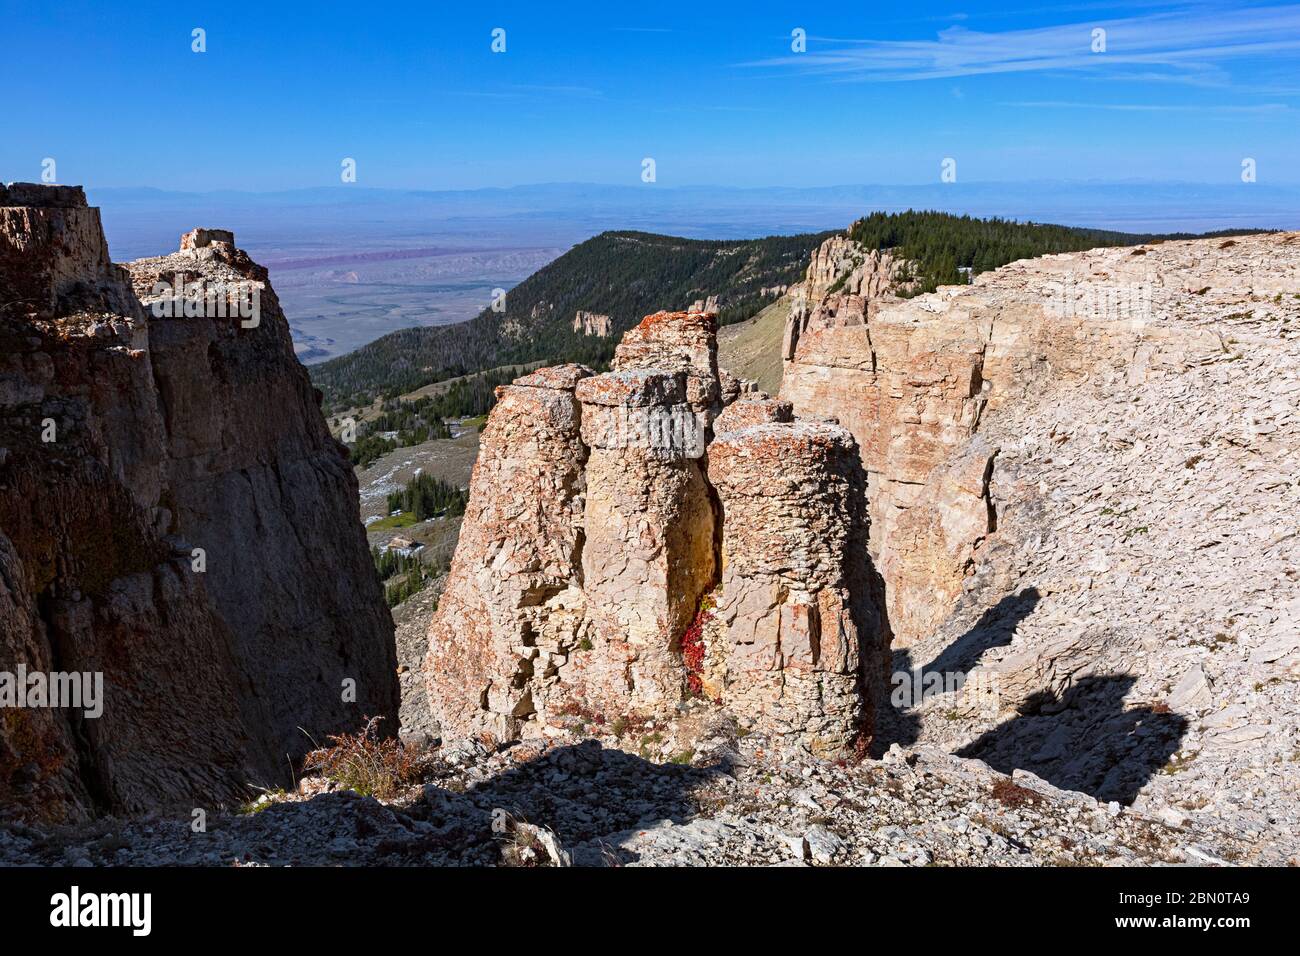 WY04205-00...WYOMING - View of the columns of eroded limestone along the cliffs overlooking the large basin west of the Bighorn Mountains. Stock Photo